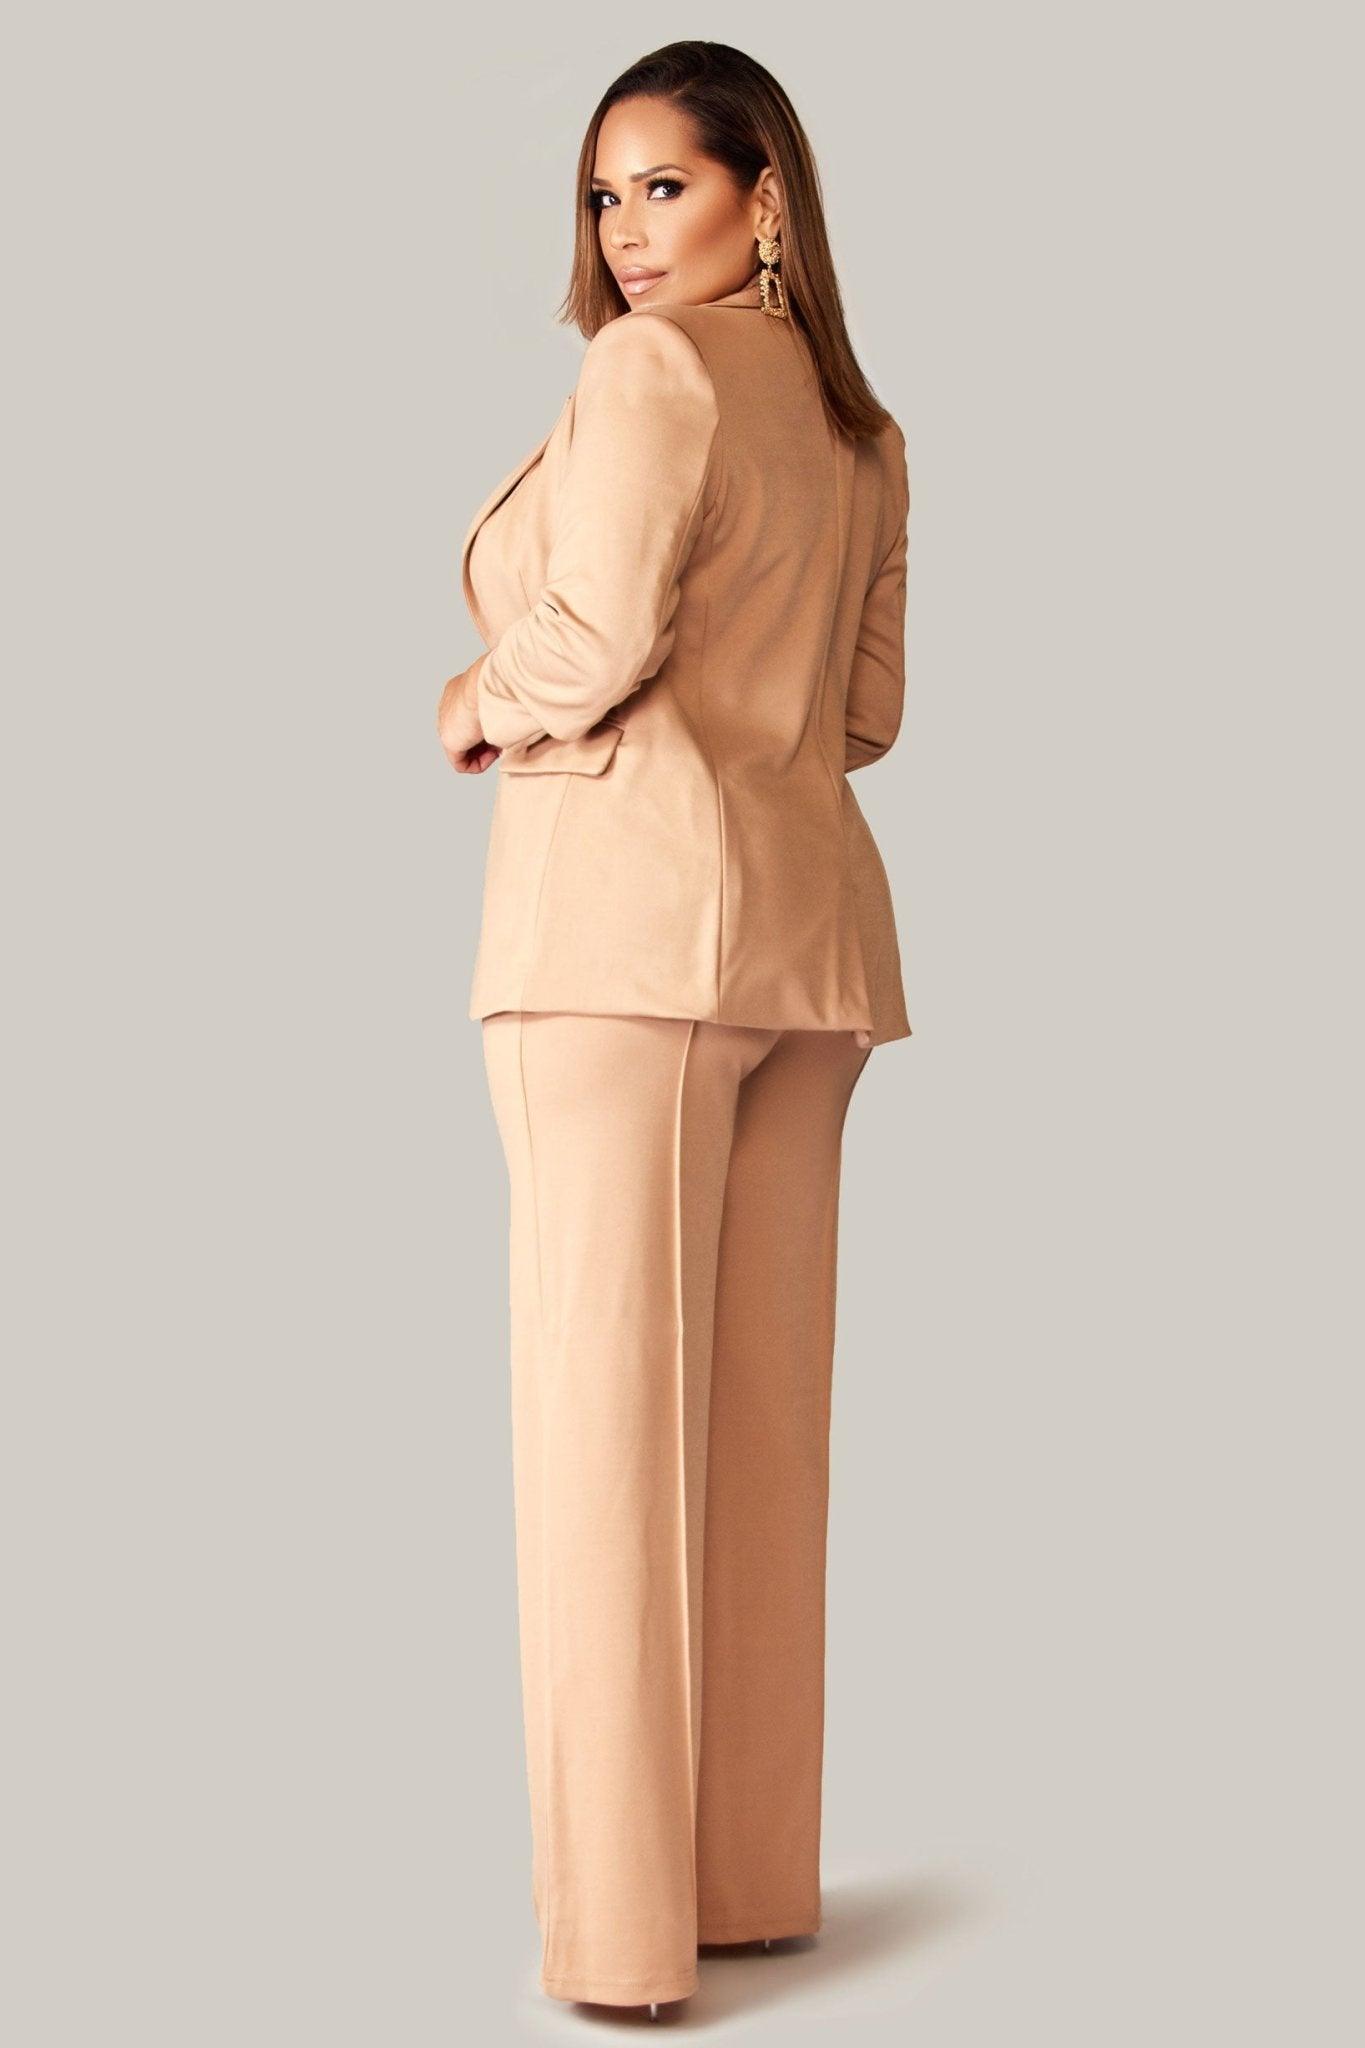 Vada High Couture 3 PC Blazer Set - MY SEXY STYLES